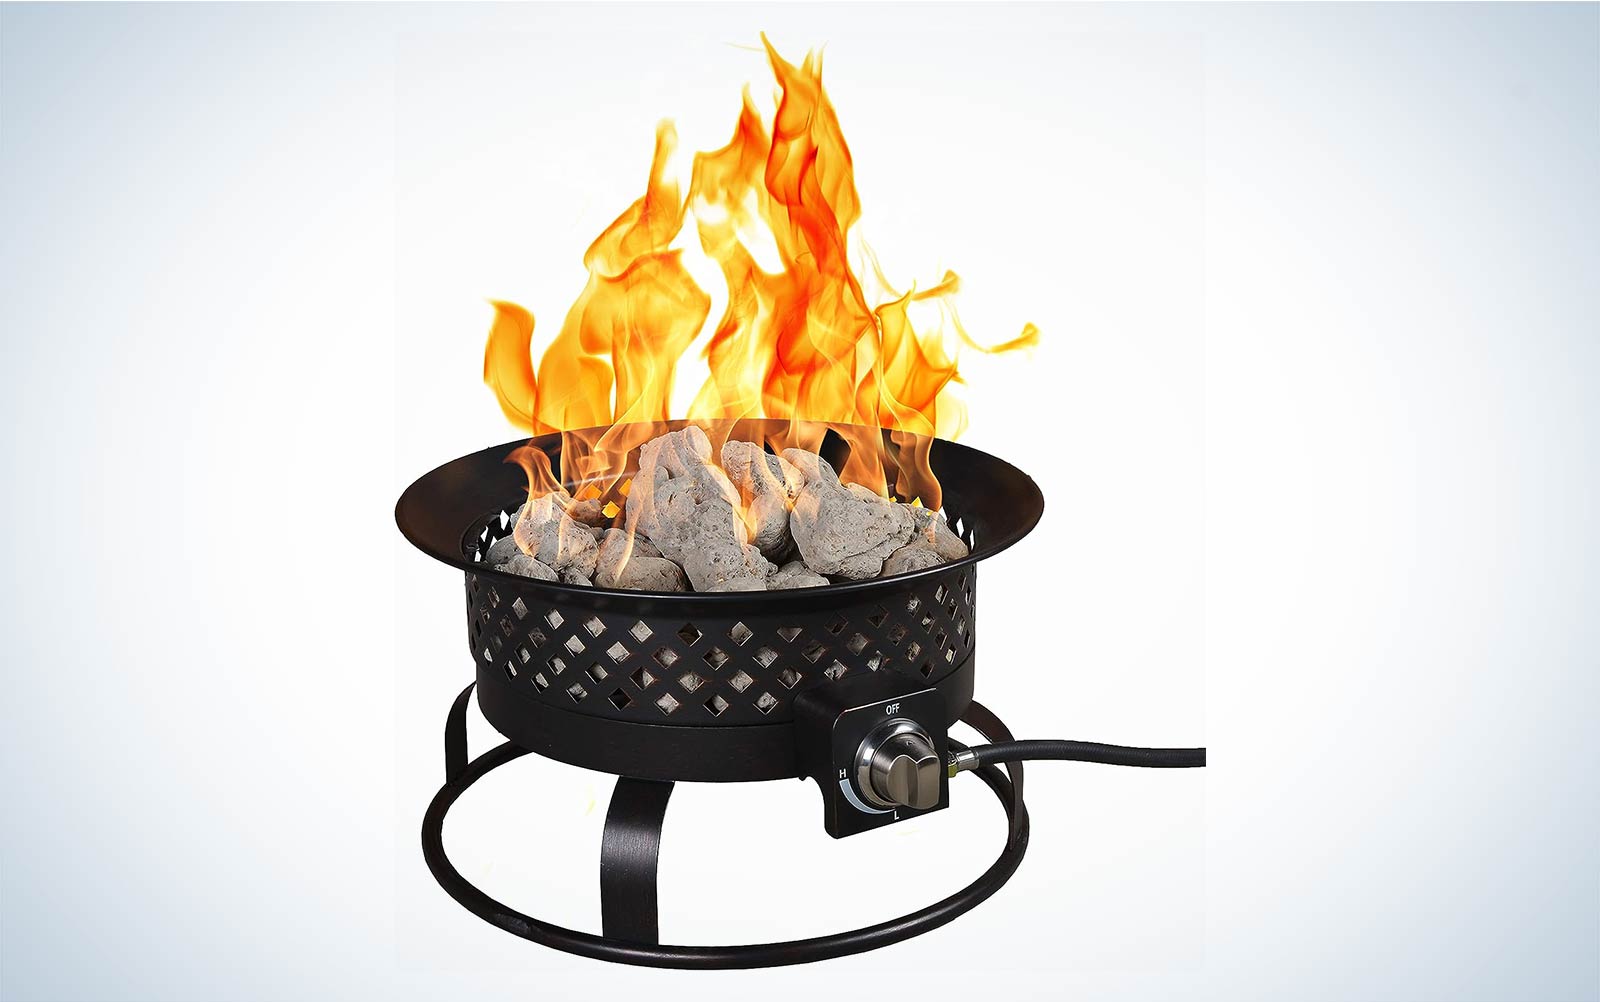 Bond Manufacturing Aurora Portable Steel Propane Gas Fire on a plain background with fire